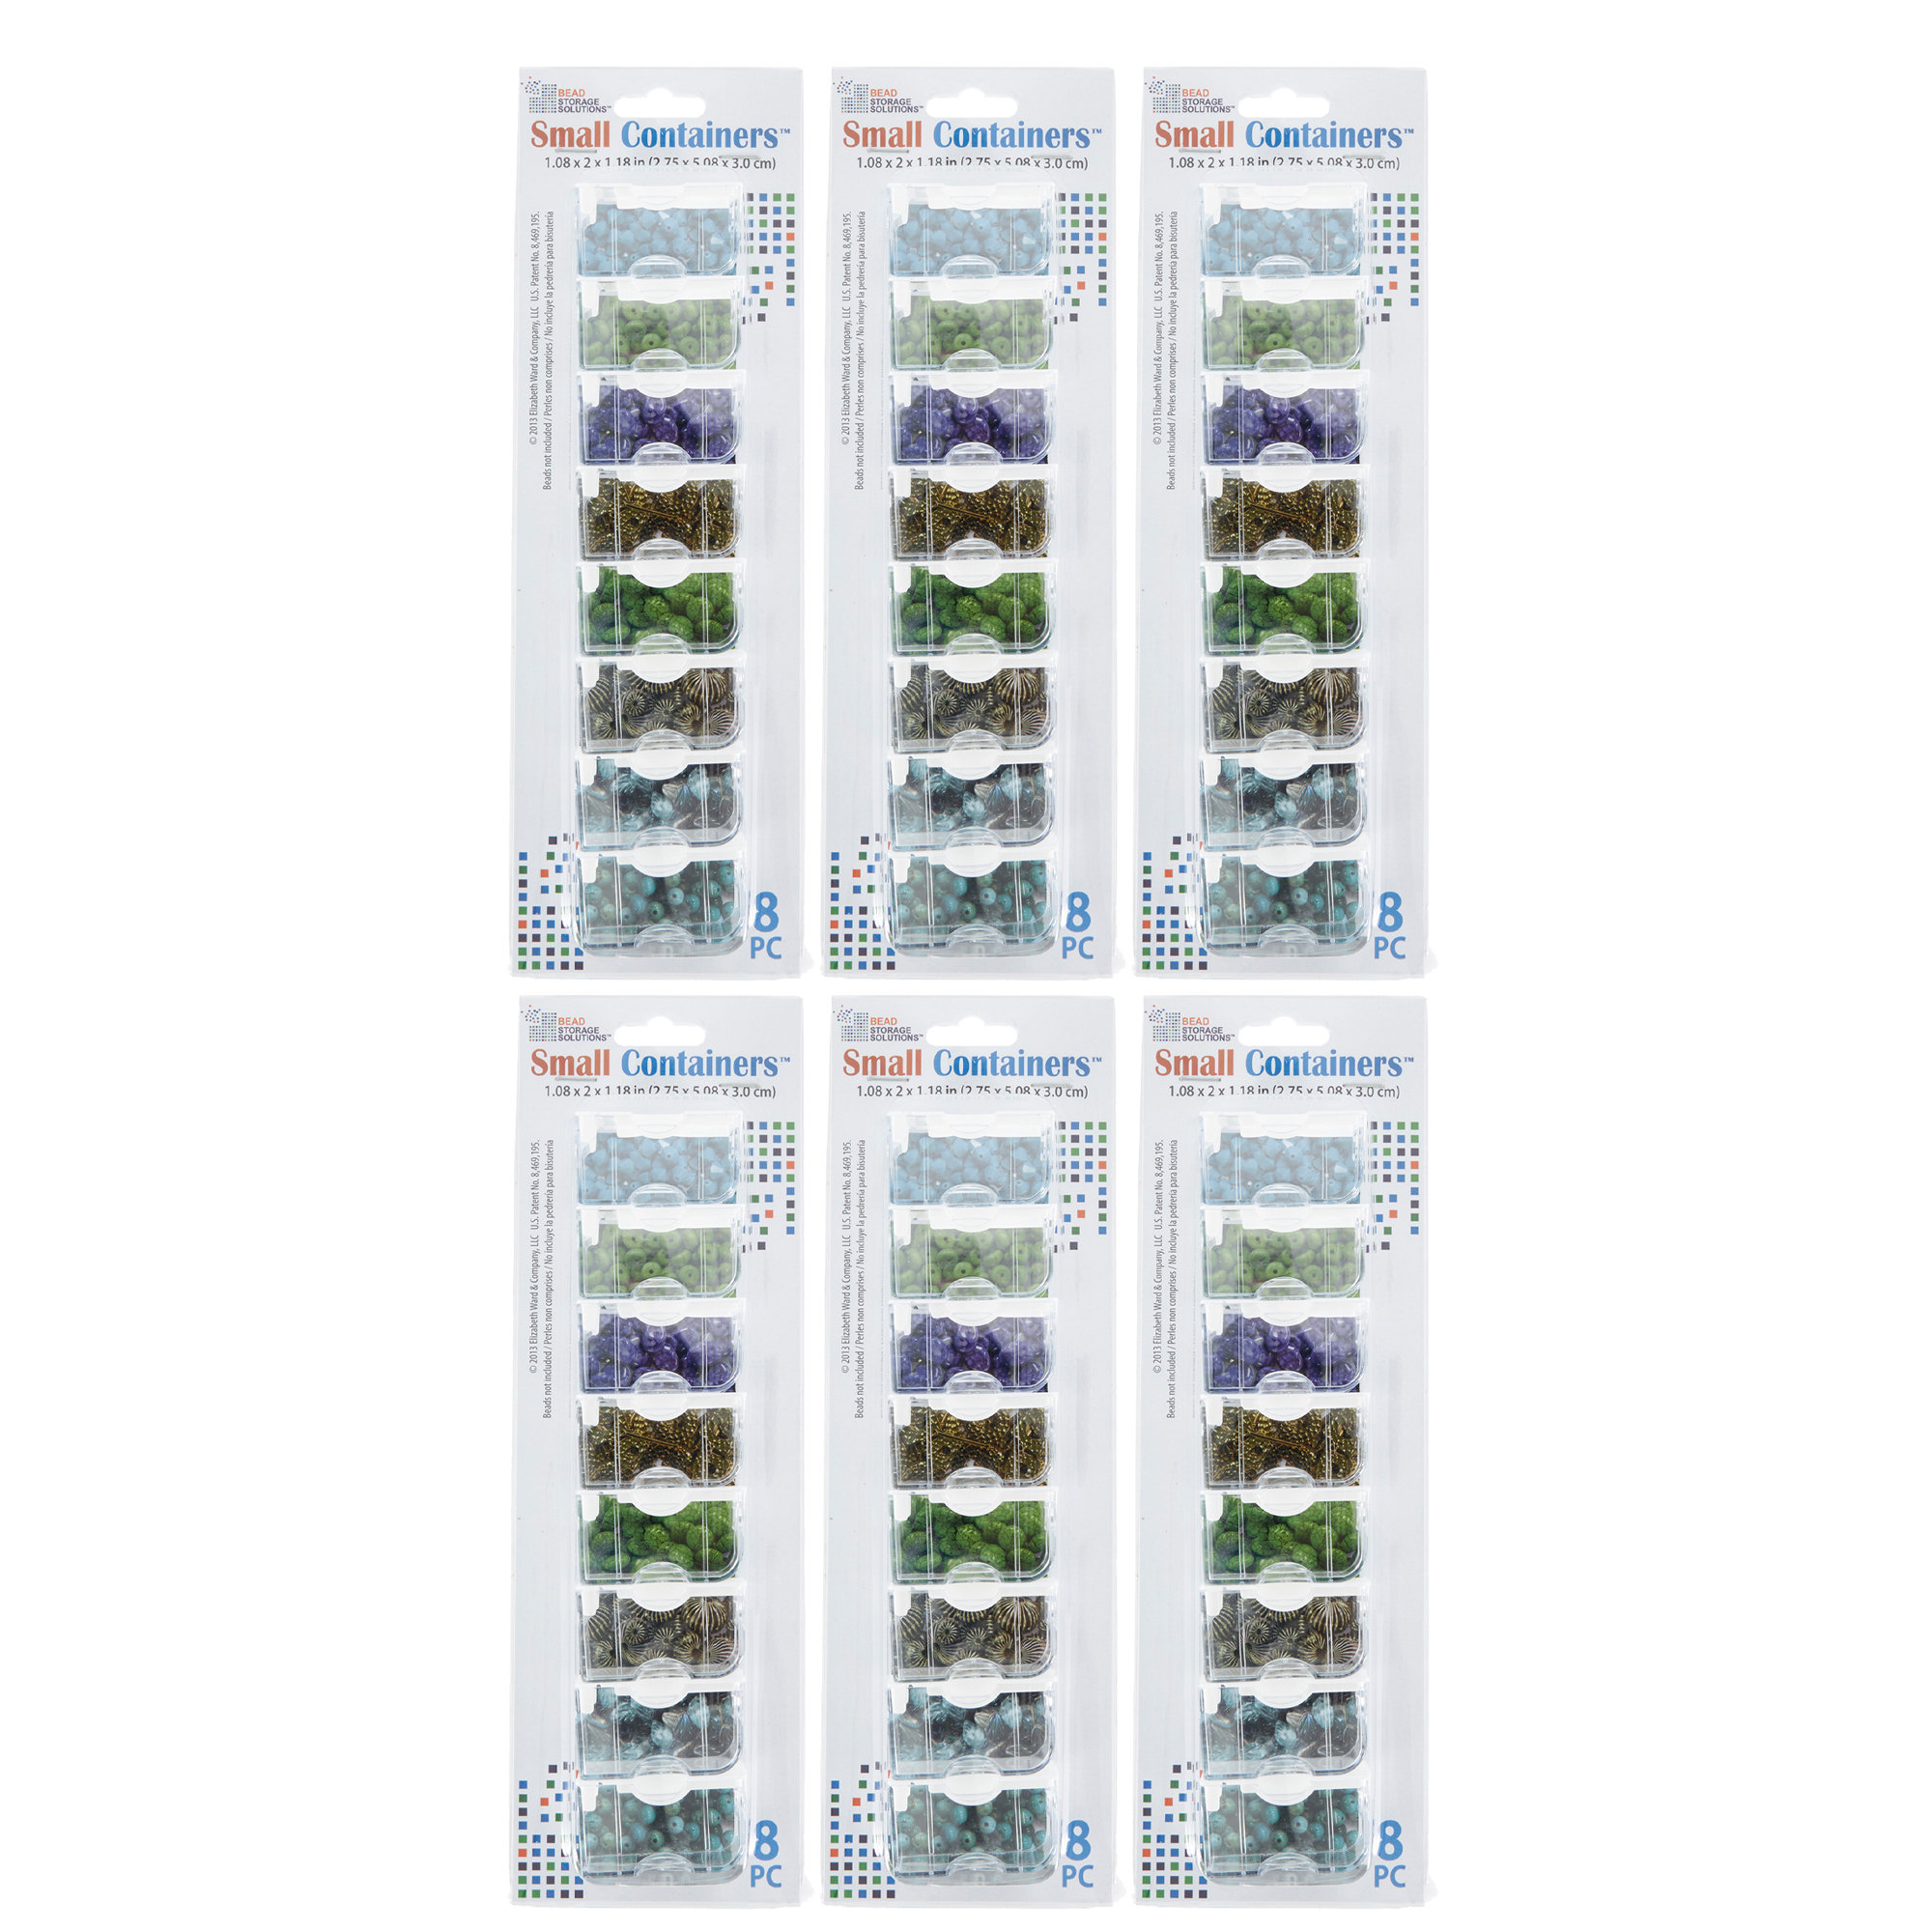  Bead Storage Solutions Elizabeth Ward 5 Piece Craft Organizing  Storage Containers for Small Beads, Crystals, and Fasteners, Clear (3 Pack)  : Arts, Crafts & Sewing